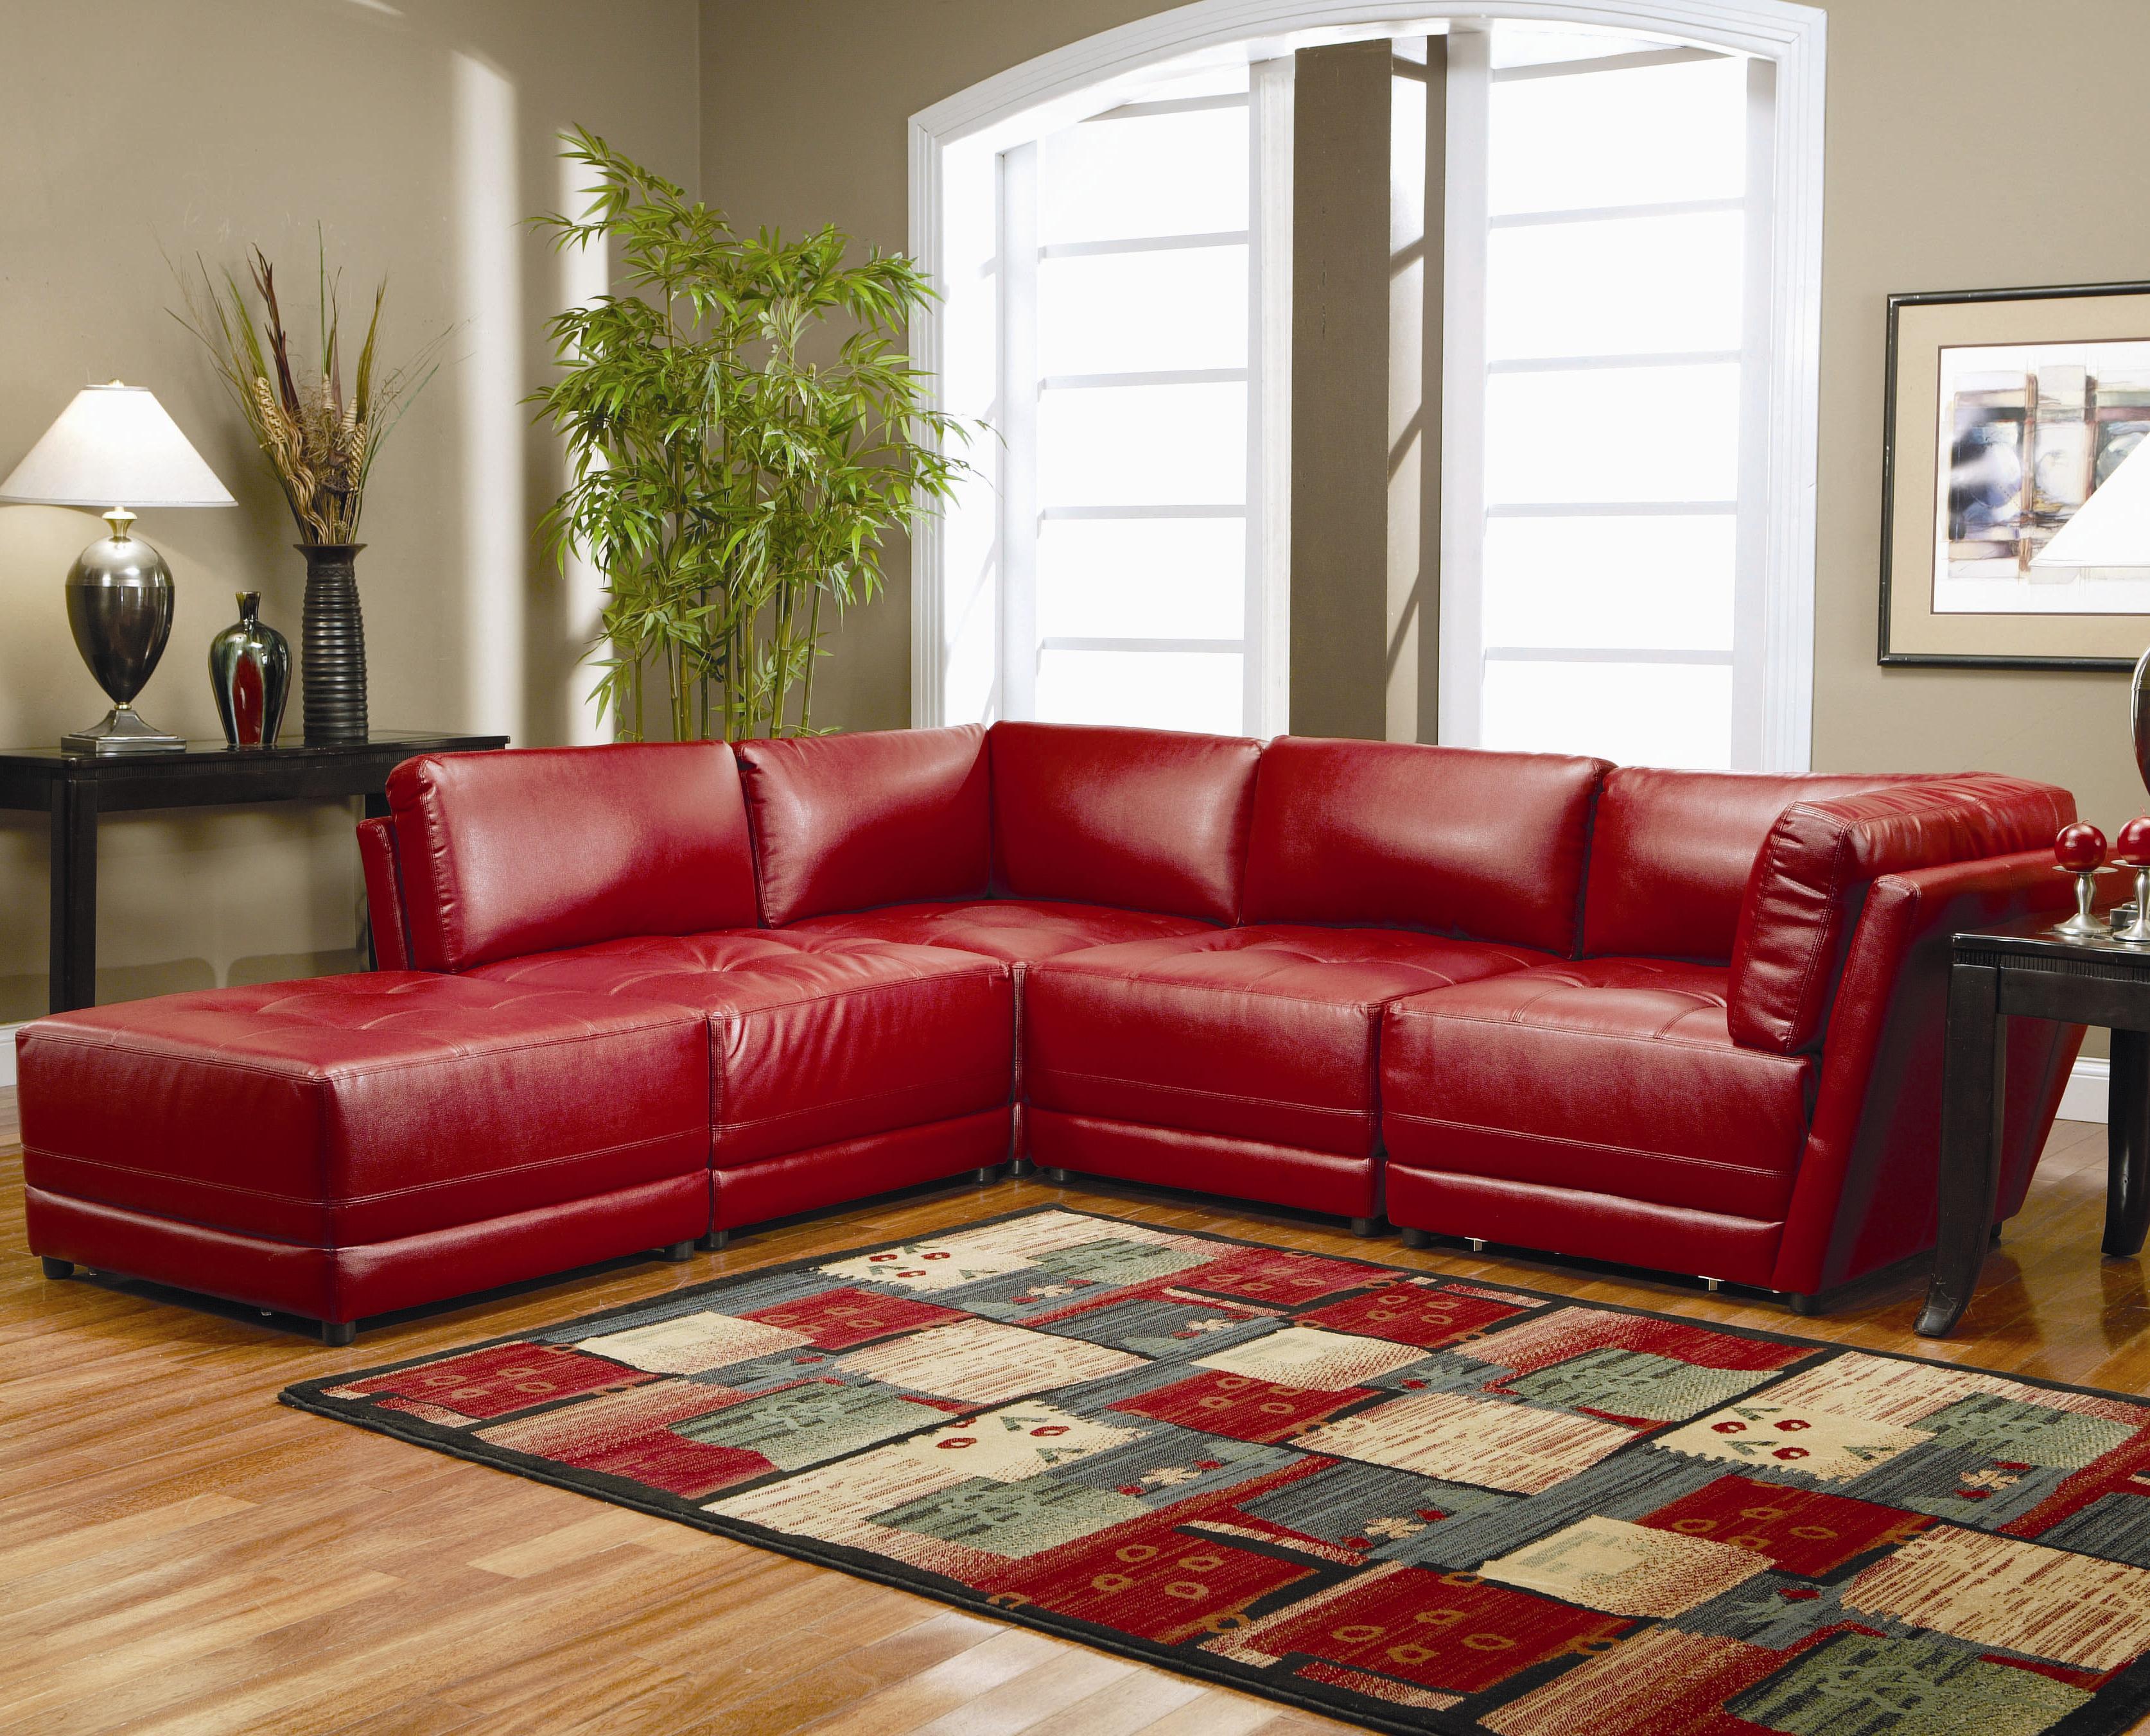 Red Living Room Ideas to Decorate Modern Living Room Sets | Roy Home Design